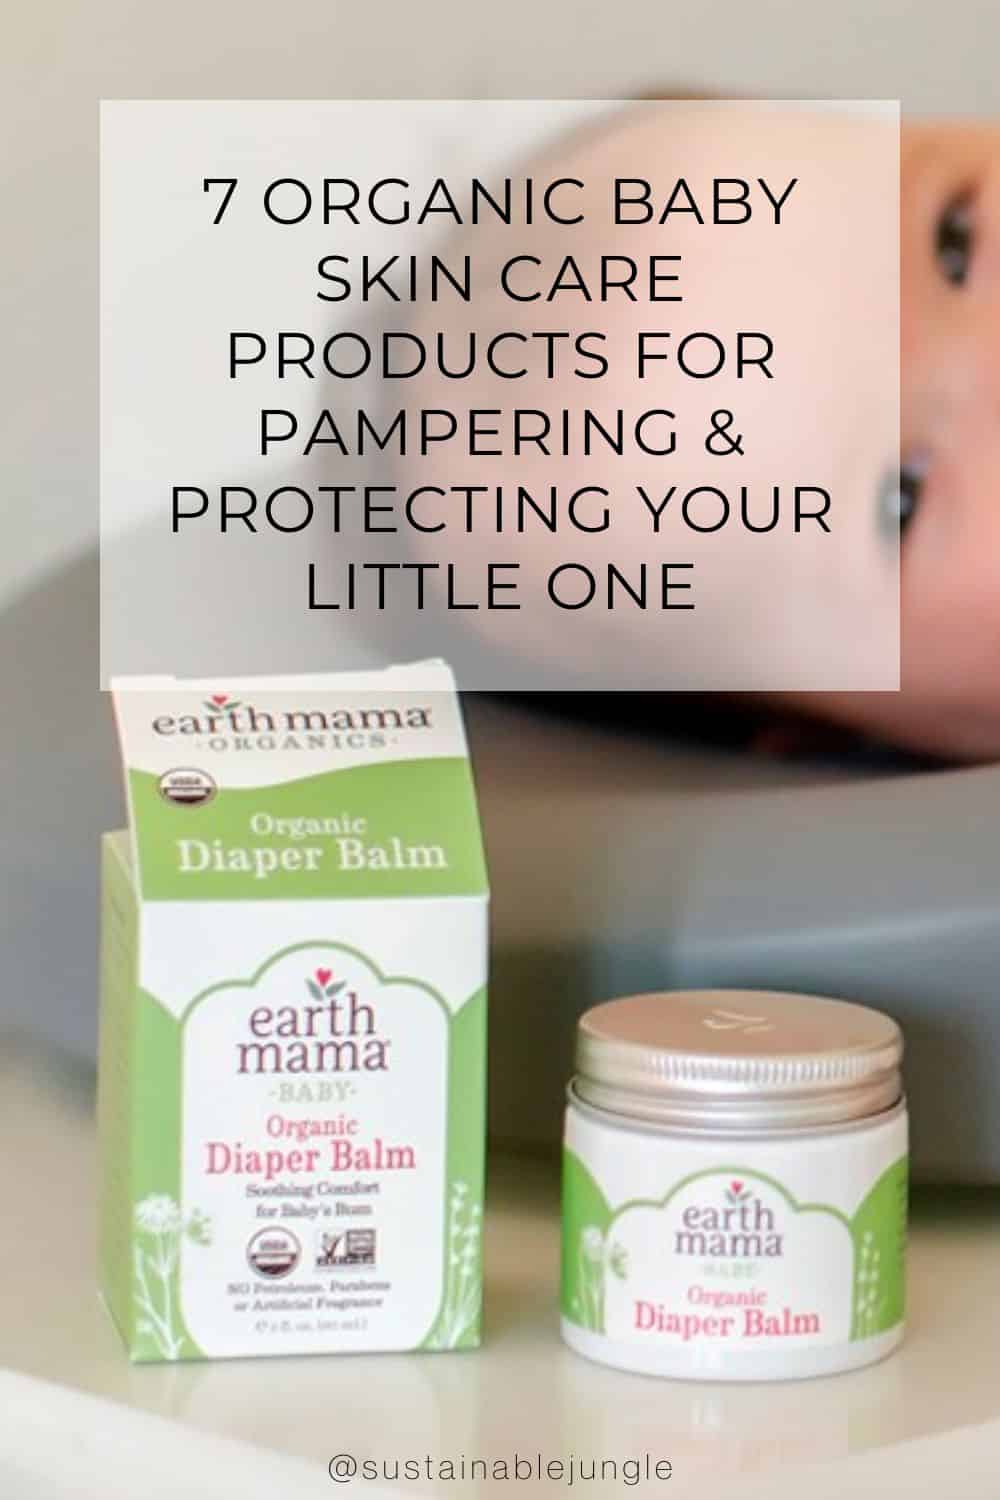 7 Organic Baby Skin Care Products For Pampering & Protecting Your Little One Image by Earth Mama Organics #organicbabyskincare #bestorganicbabyskincareproducts #certifiedorganicbabyskincare #naturalbabyskincare #naturalbabyskincareproducts #naturalskincareforbabies #sustainablejungle